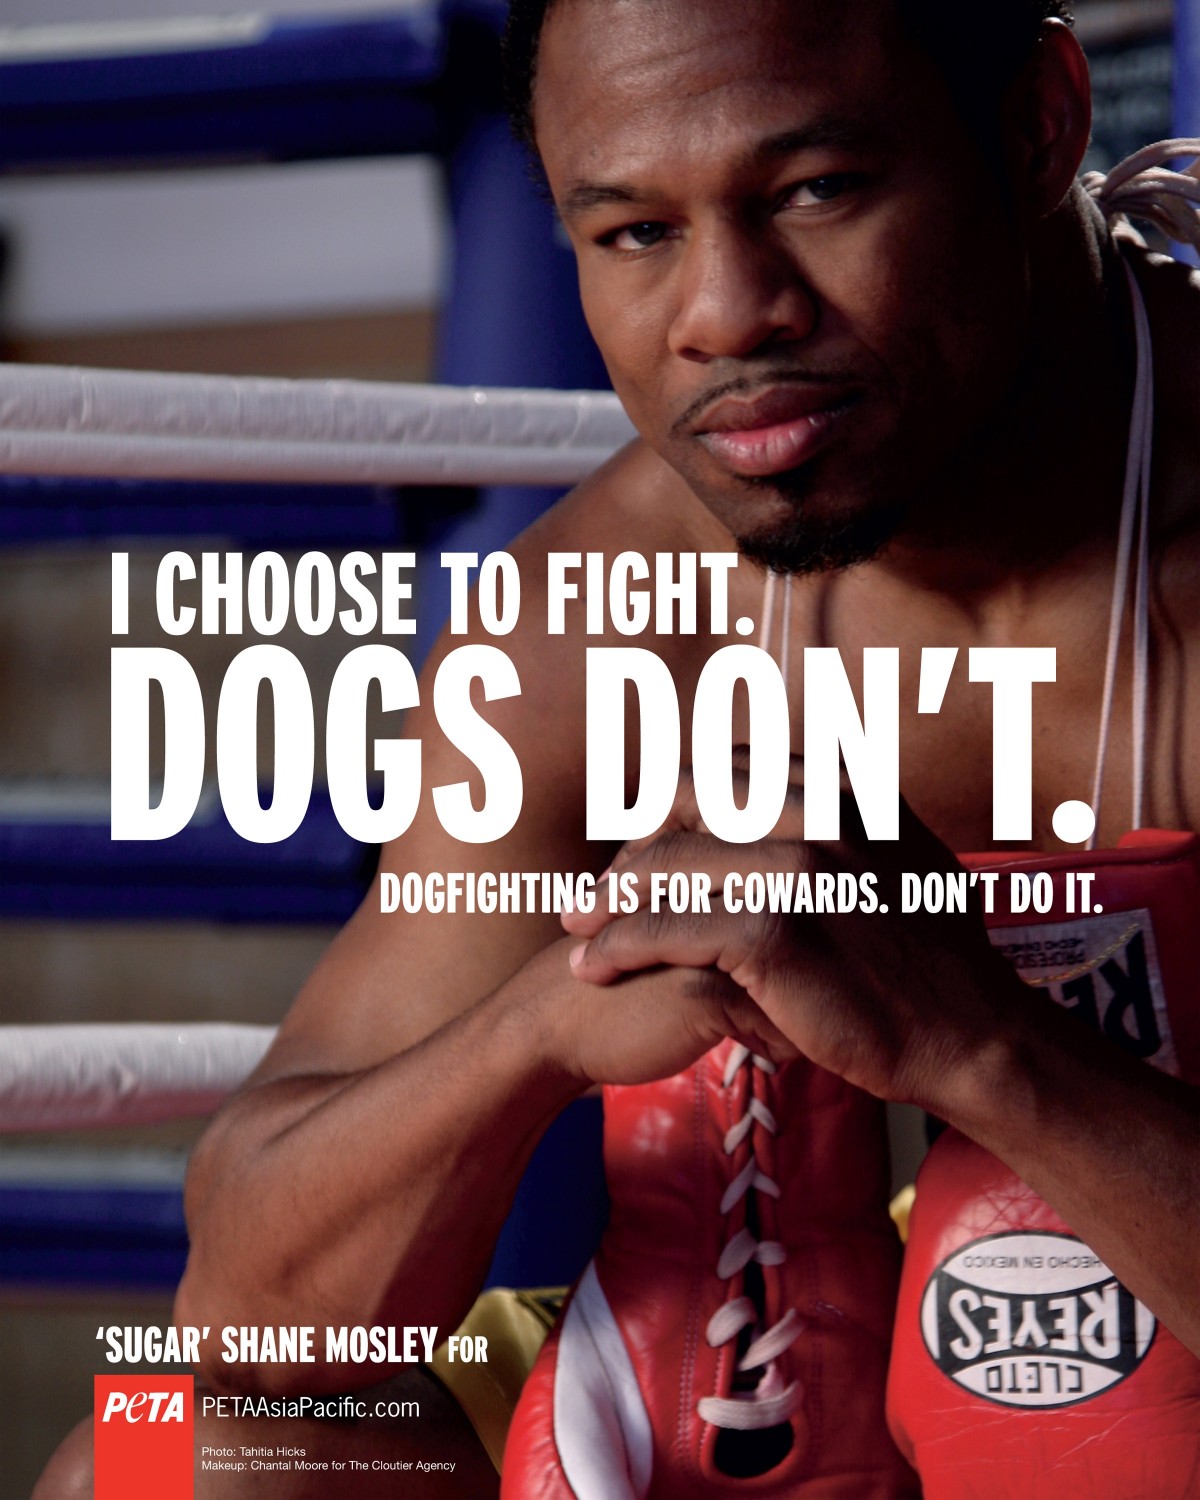 Pacquiao Opponent ‘Sugar’ Shane Mosley Has a Soft Spot for Animals